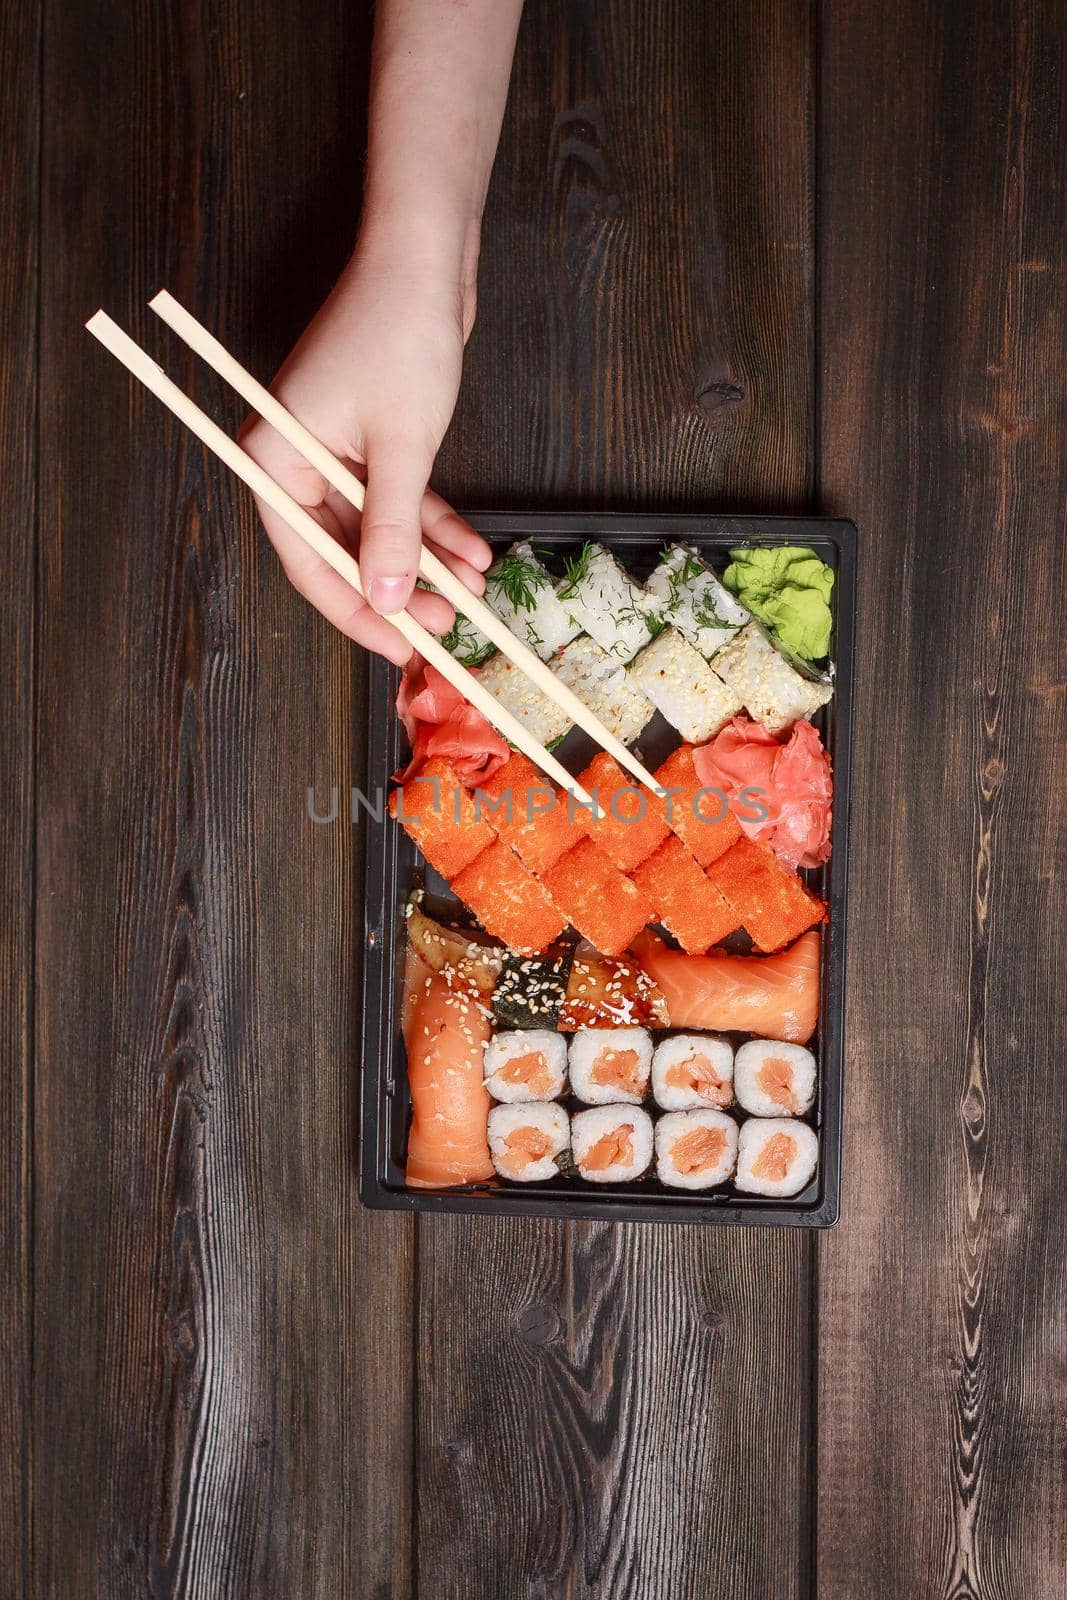 ginger seafood wooden table sushi and rolls delicacy. High quality photo